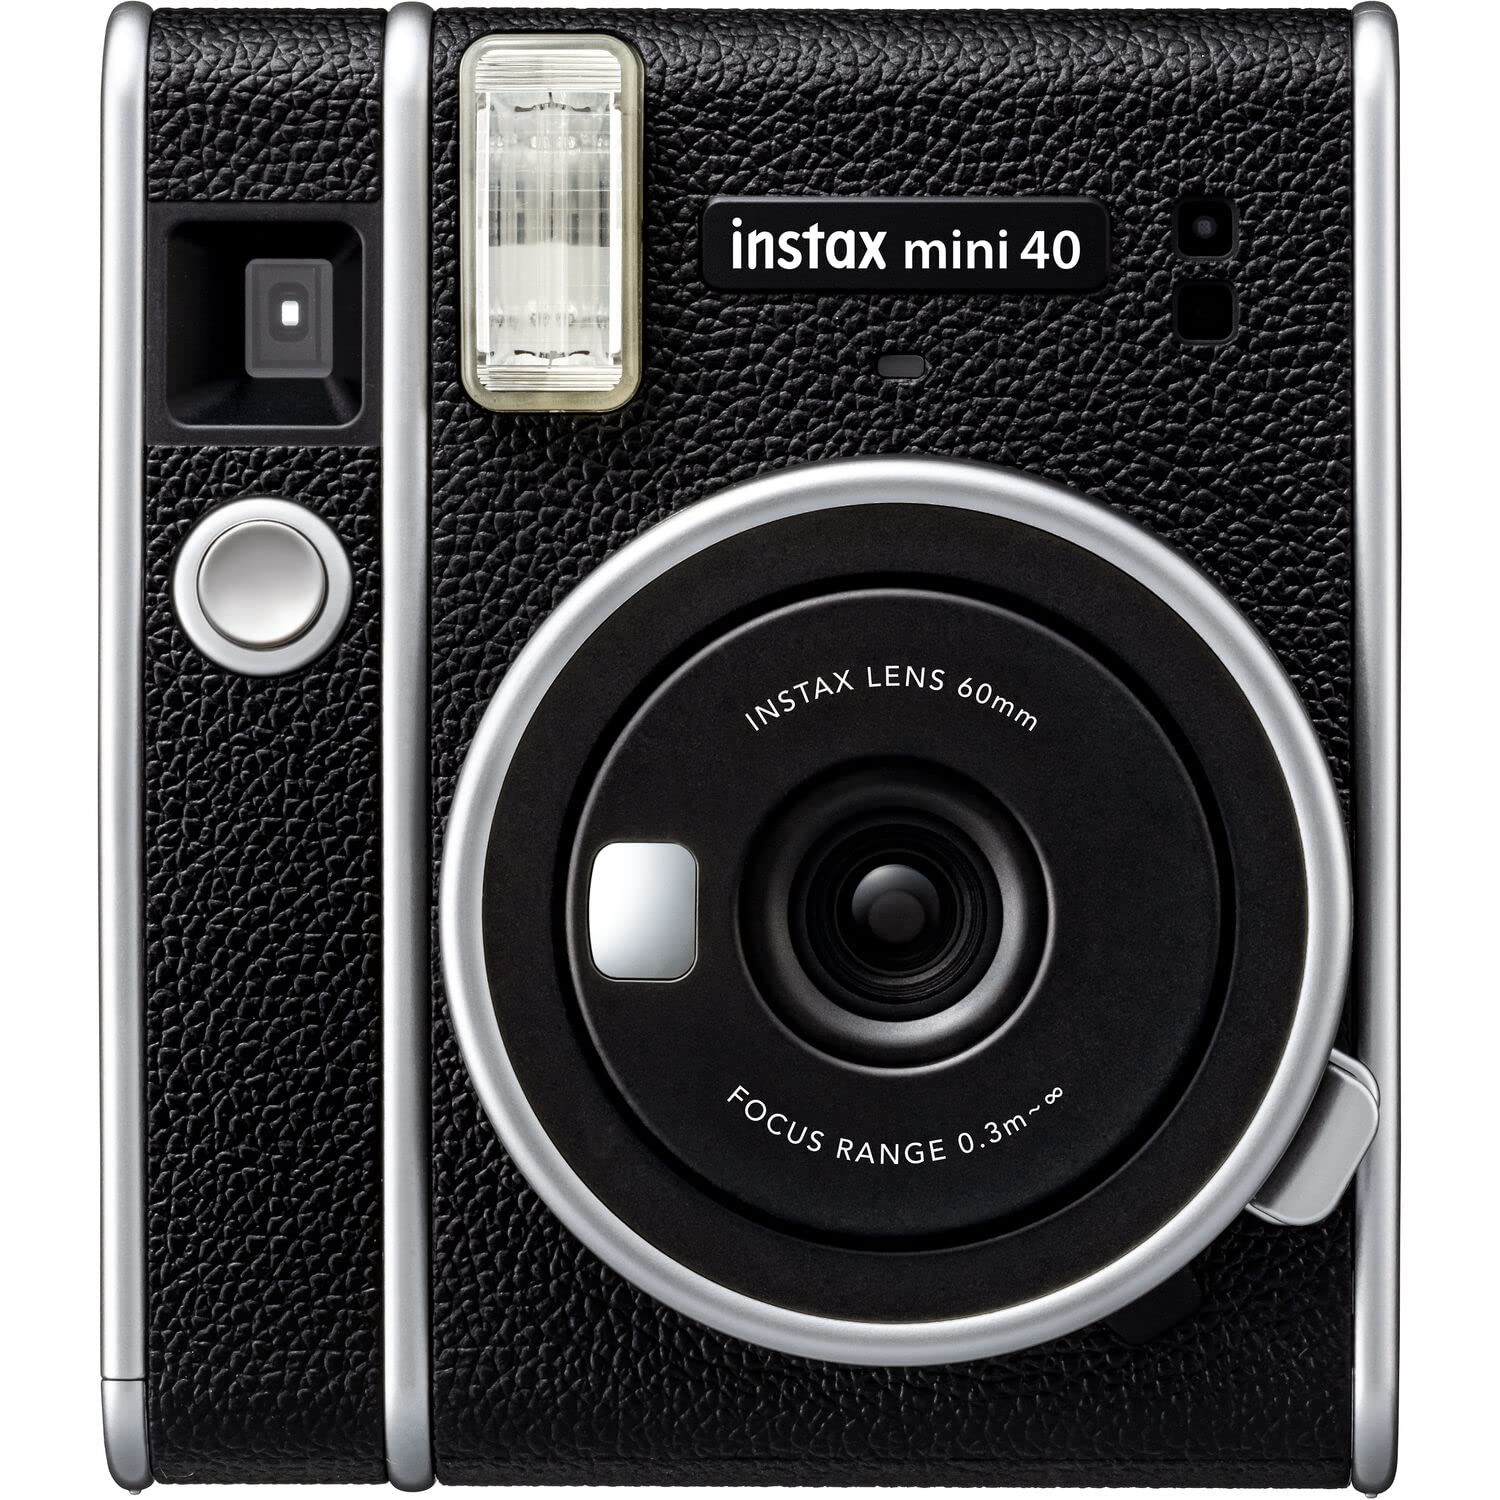 Fujifilm Instax Mini 40 Instant Camera Black Vintage Look Bundle with Fuji Instax Mini Film 20 Sheets + 4 Rechargeable Batteries and More Perfect Camera for Kids, Wedding, Birthday Or Any Occasion